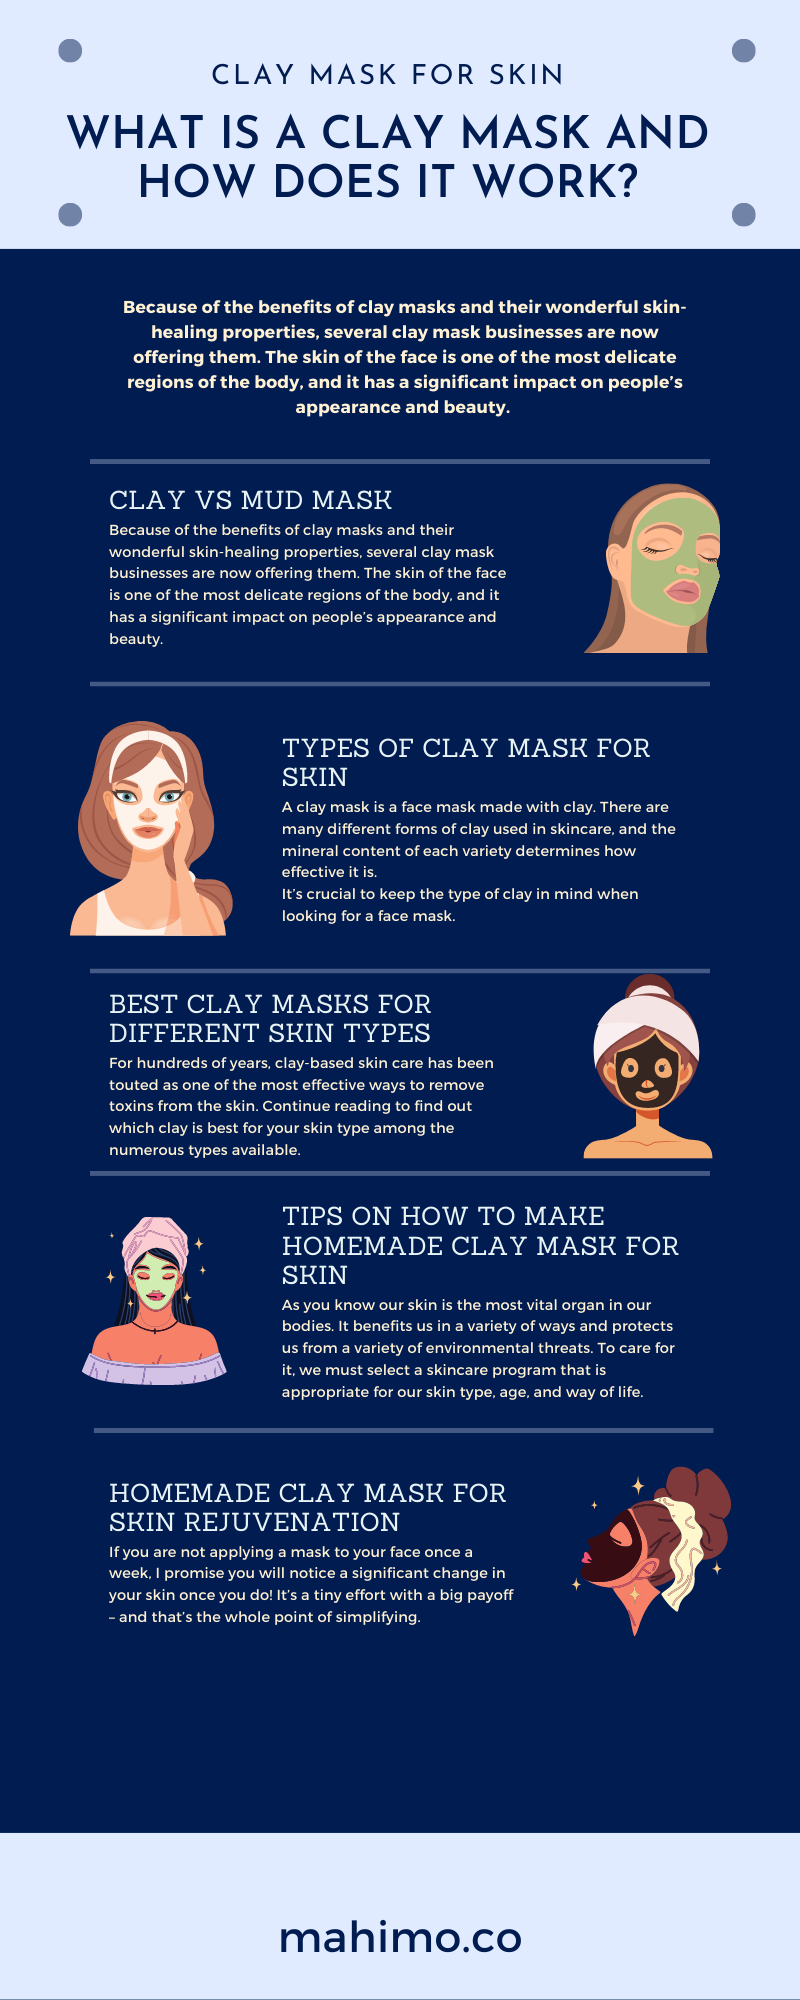 Clay mask for skin